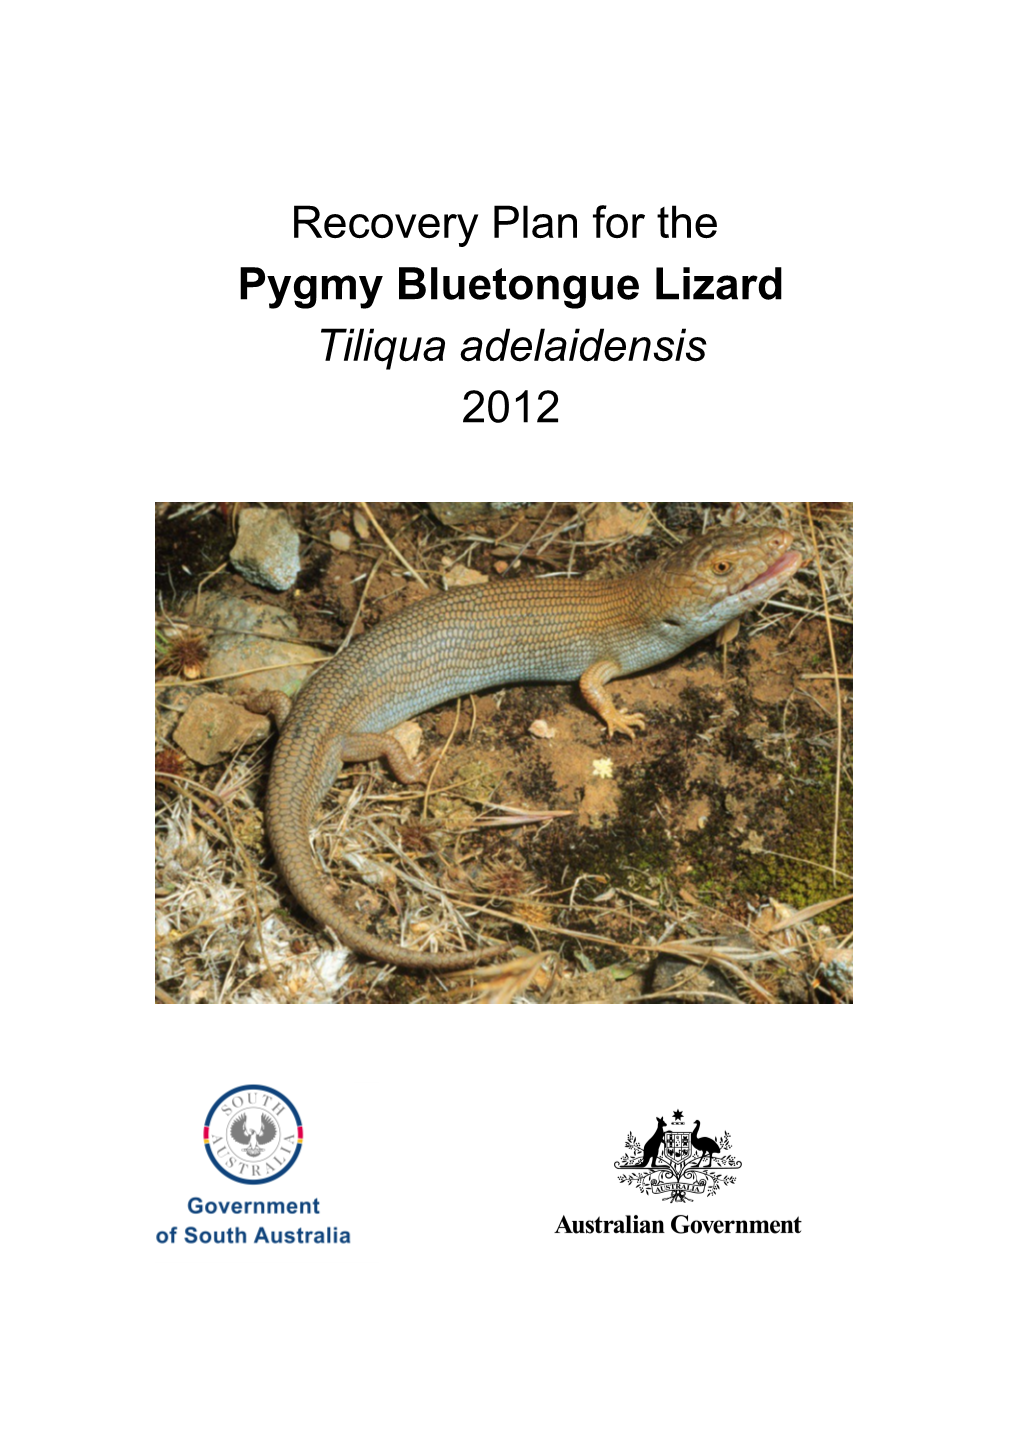 Recovery Plan for the Pygmy Bluetongue Lizard Tiliqua Adelaidensis 2012